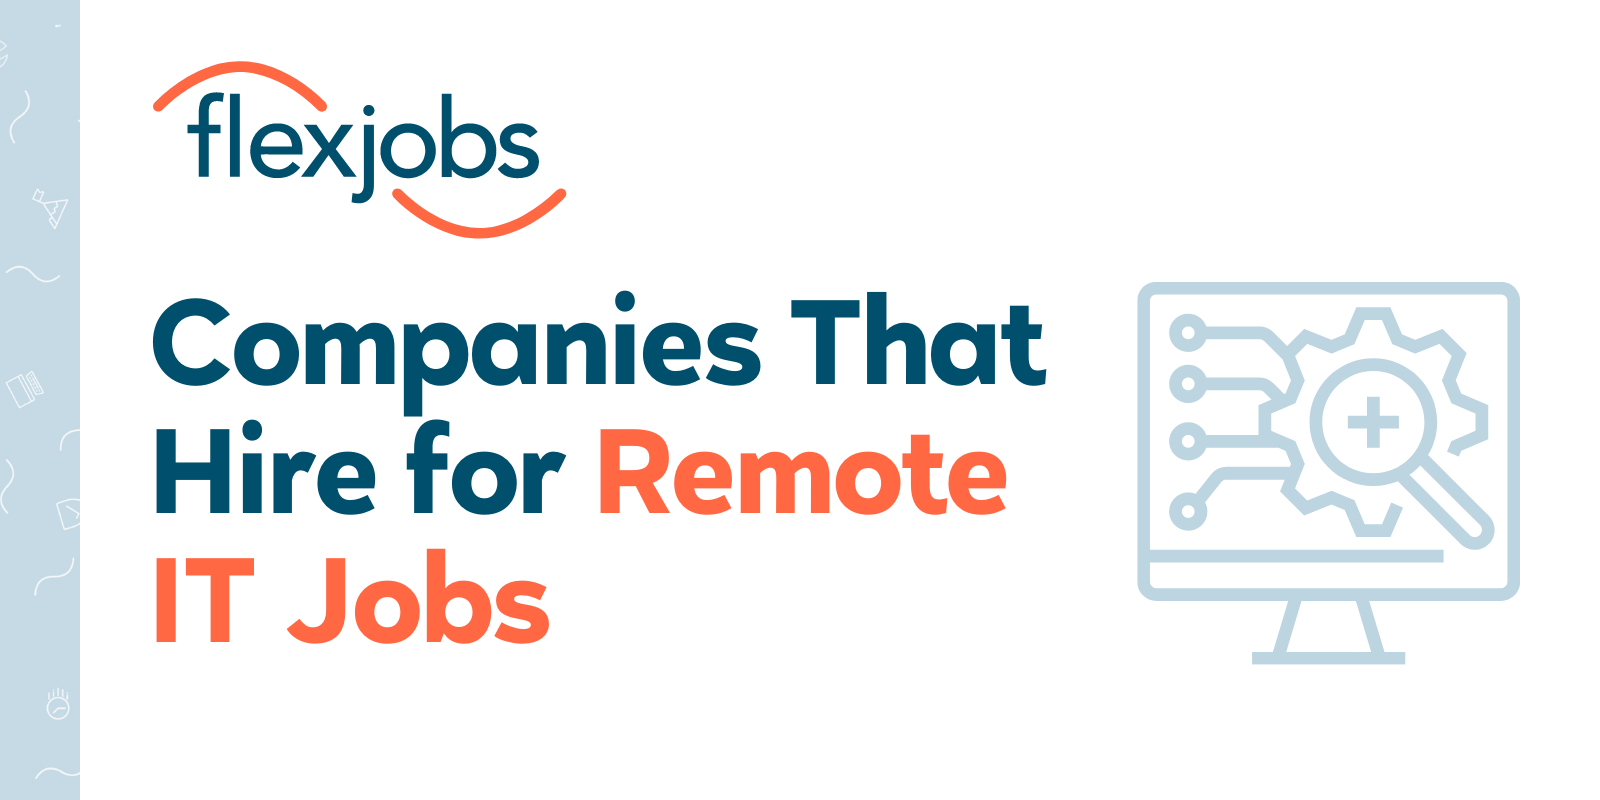 Server Jobs Near Me: A Comprehensive Guide To The Best Places To Work In The Information Technology Industry